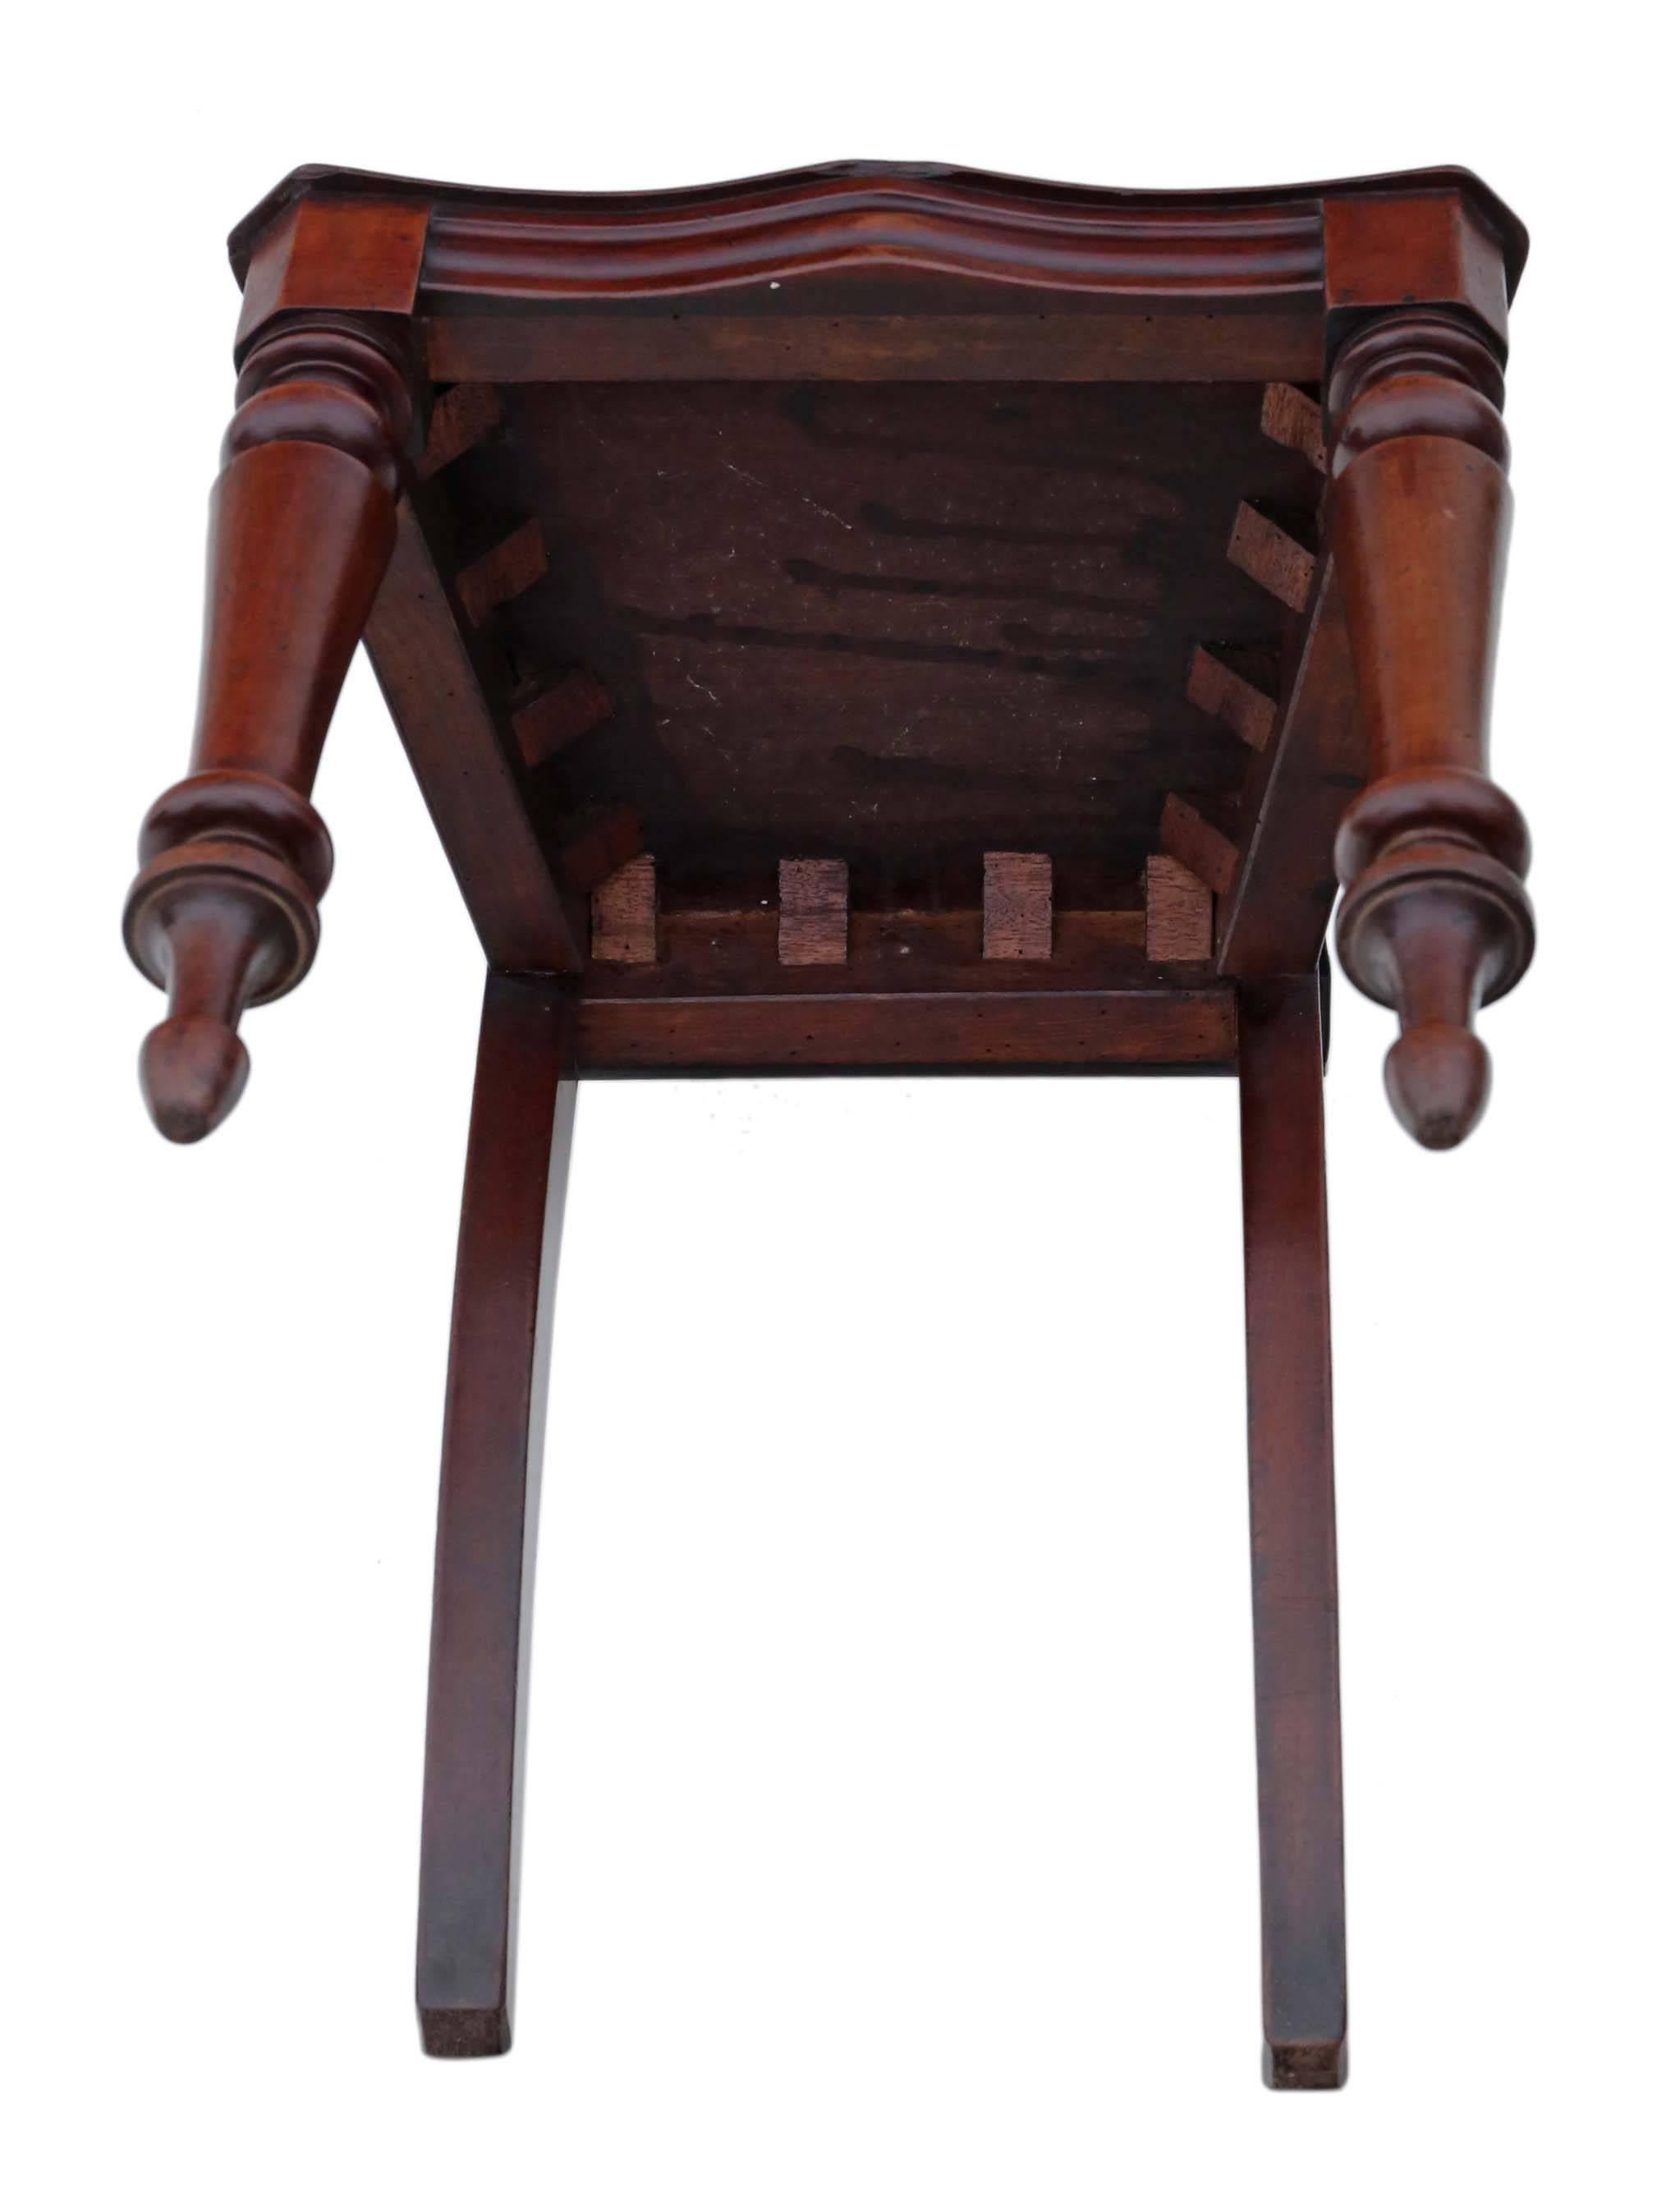 Antique Victorian circa 1850-1870 Carved Mahogany Hall Chair For Sale 3